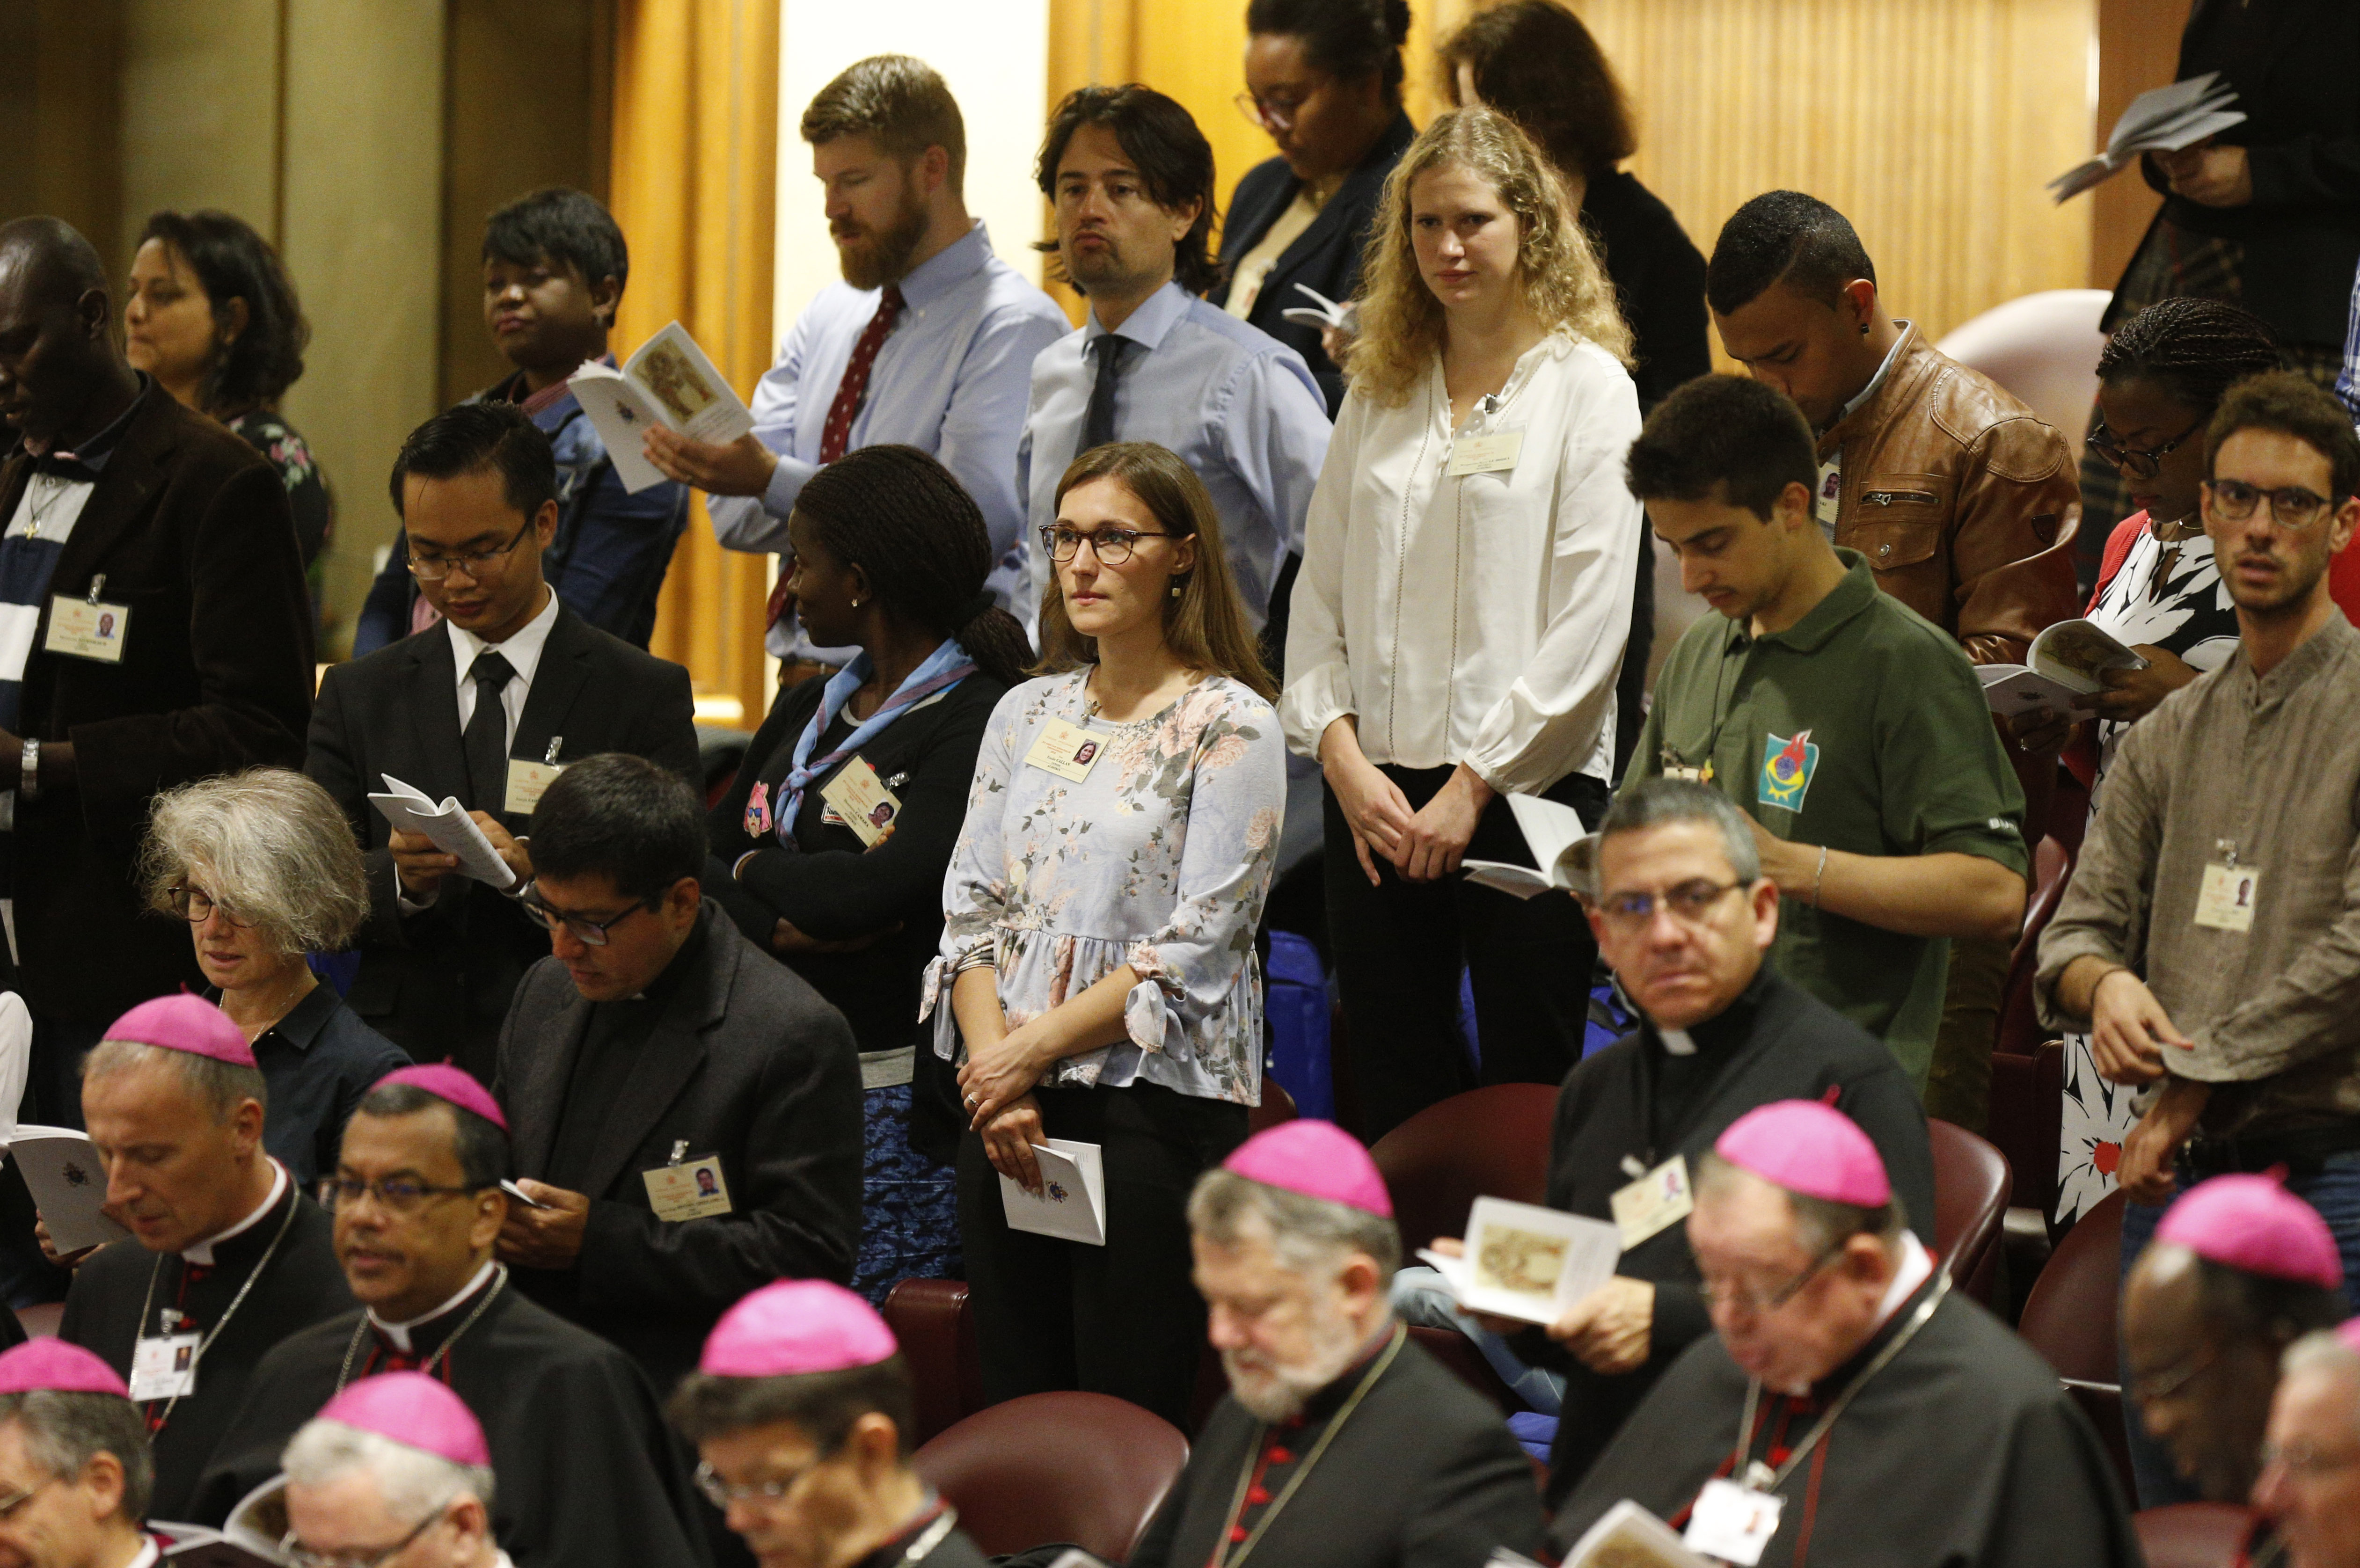 Synod groups on sexuality: Church welcomes all, calls all to conversion